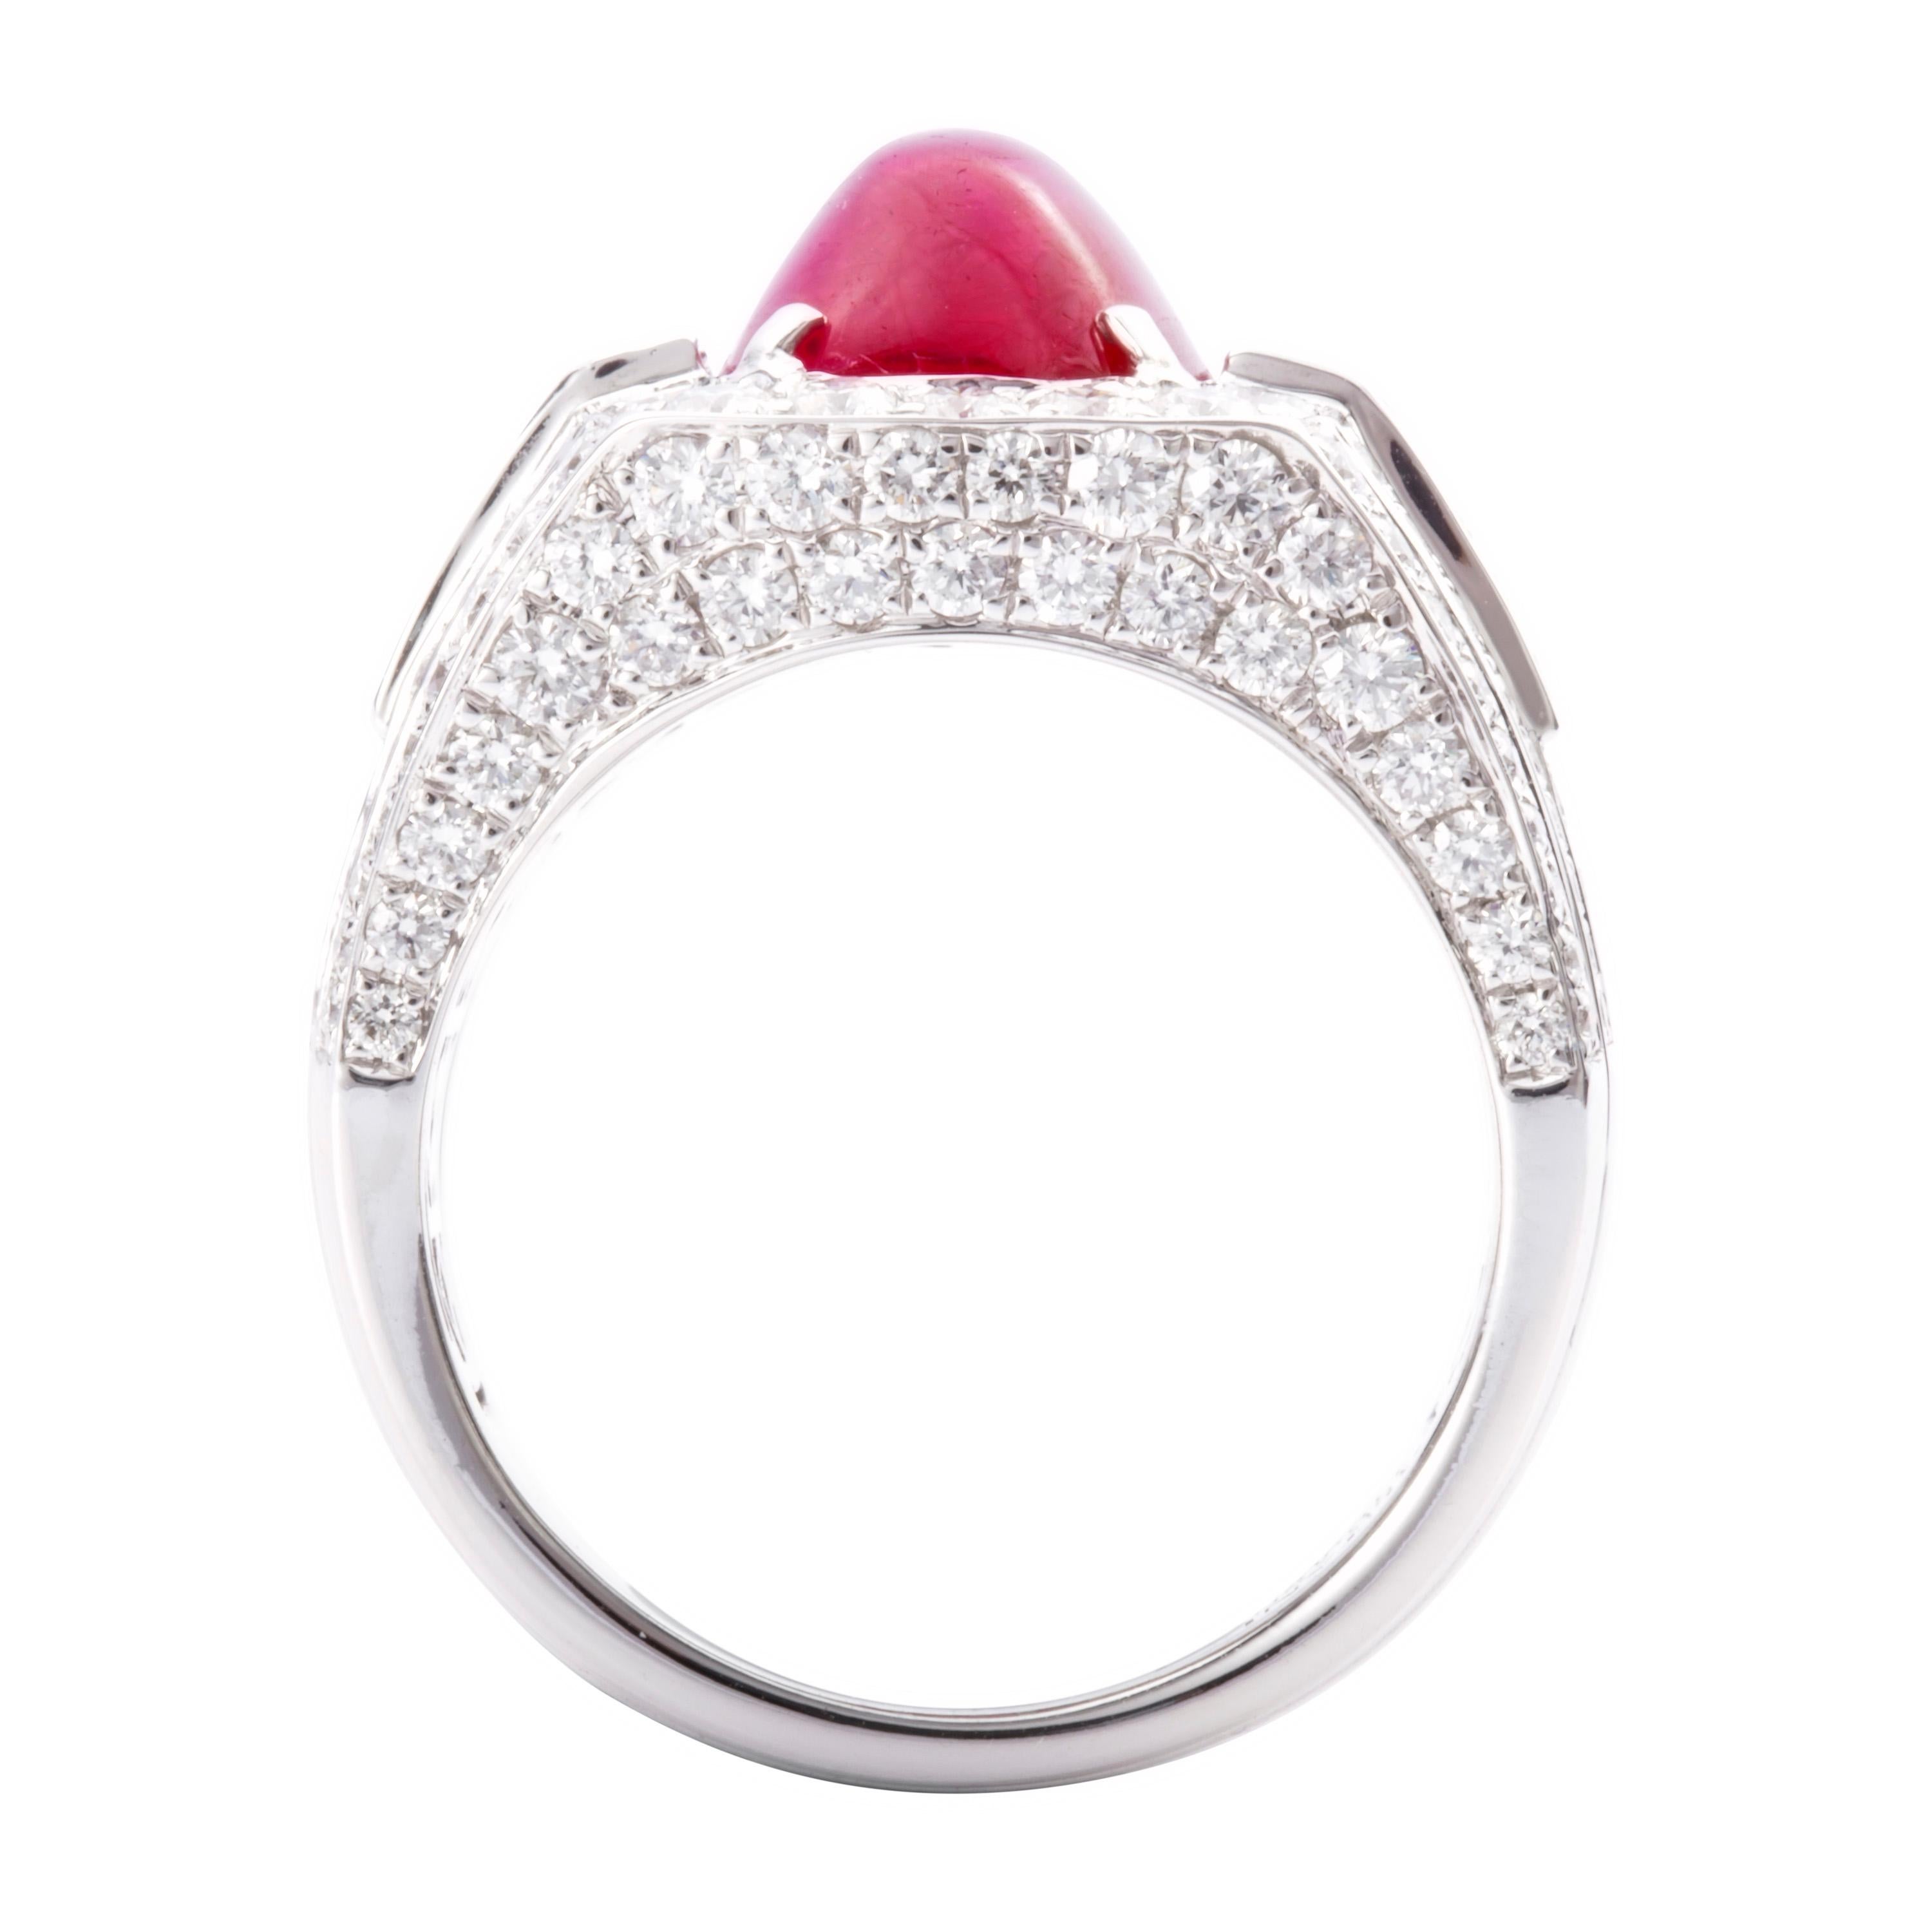 Oval Cut 6.85 Carat Cabochon Ruby Diamond 18 Karat White Gold Cocktail Ring For Sale